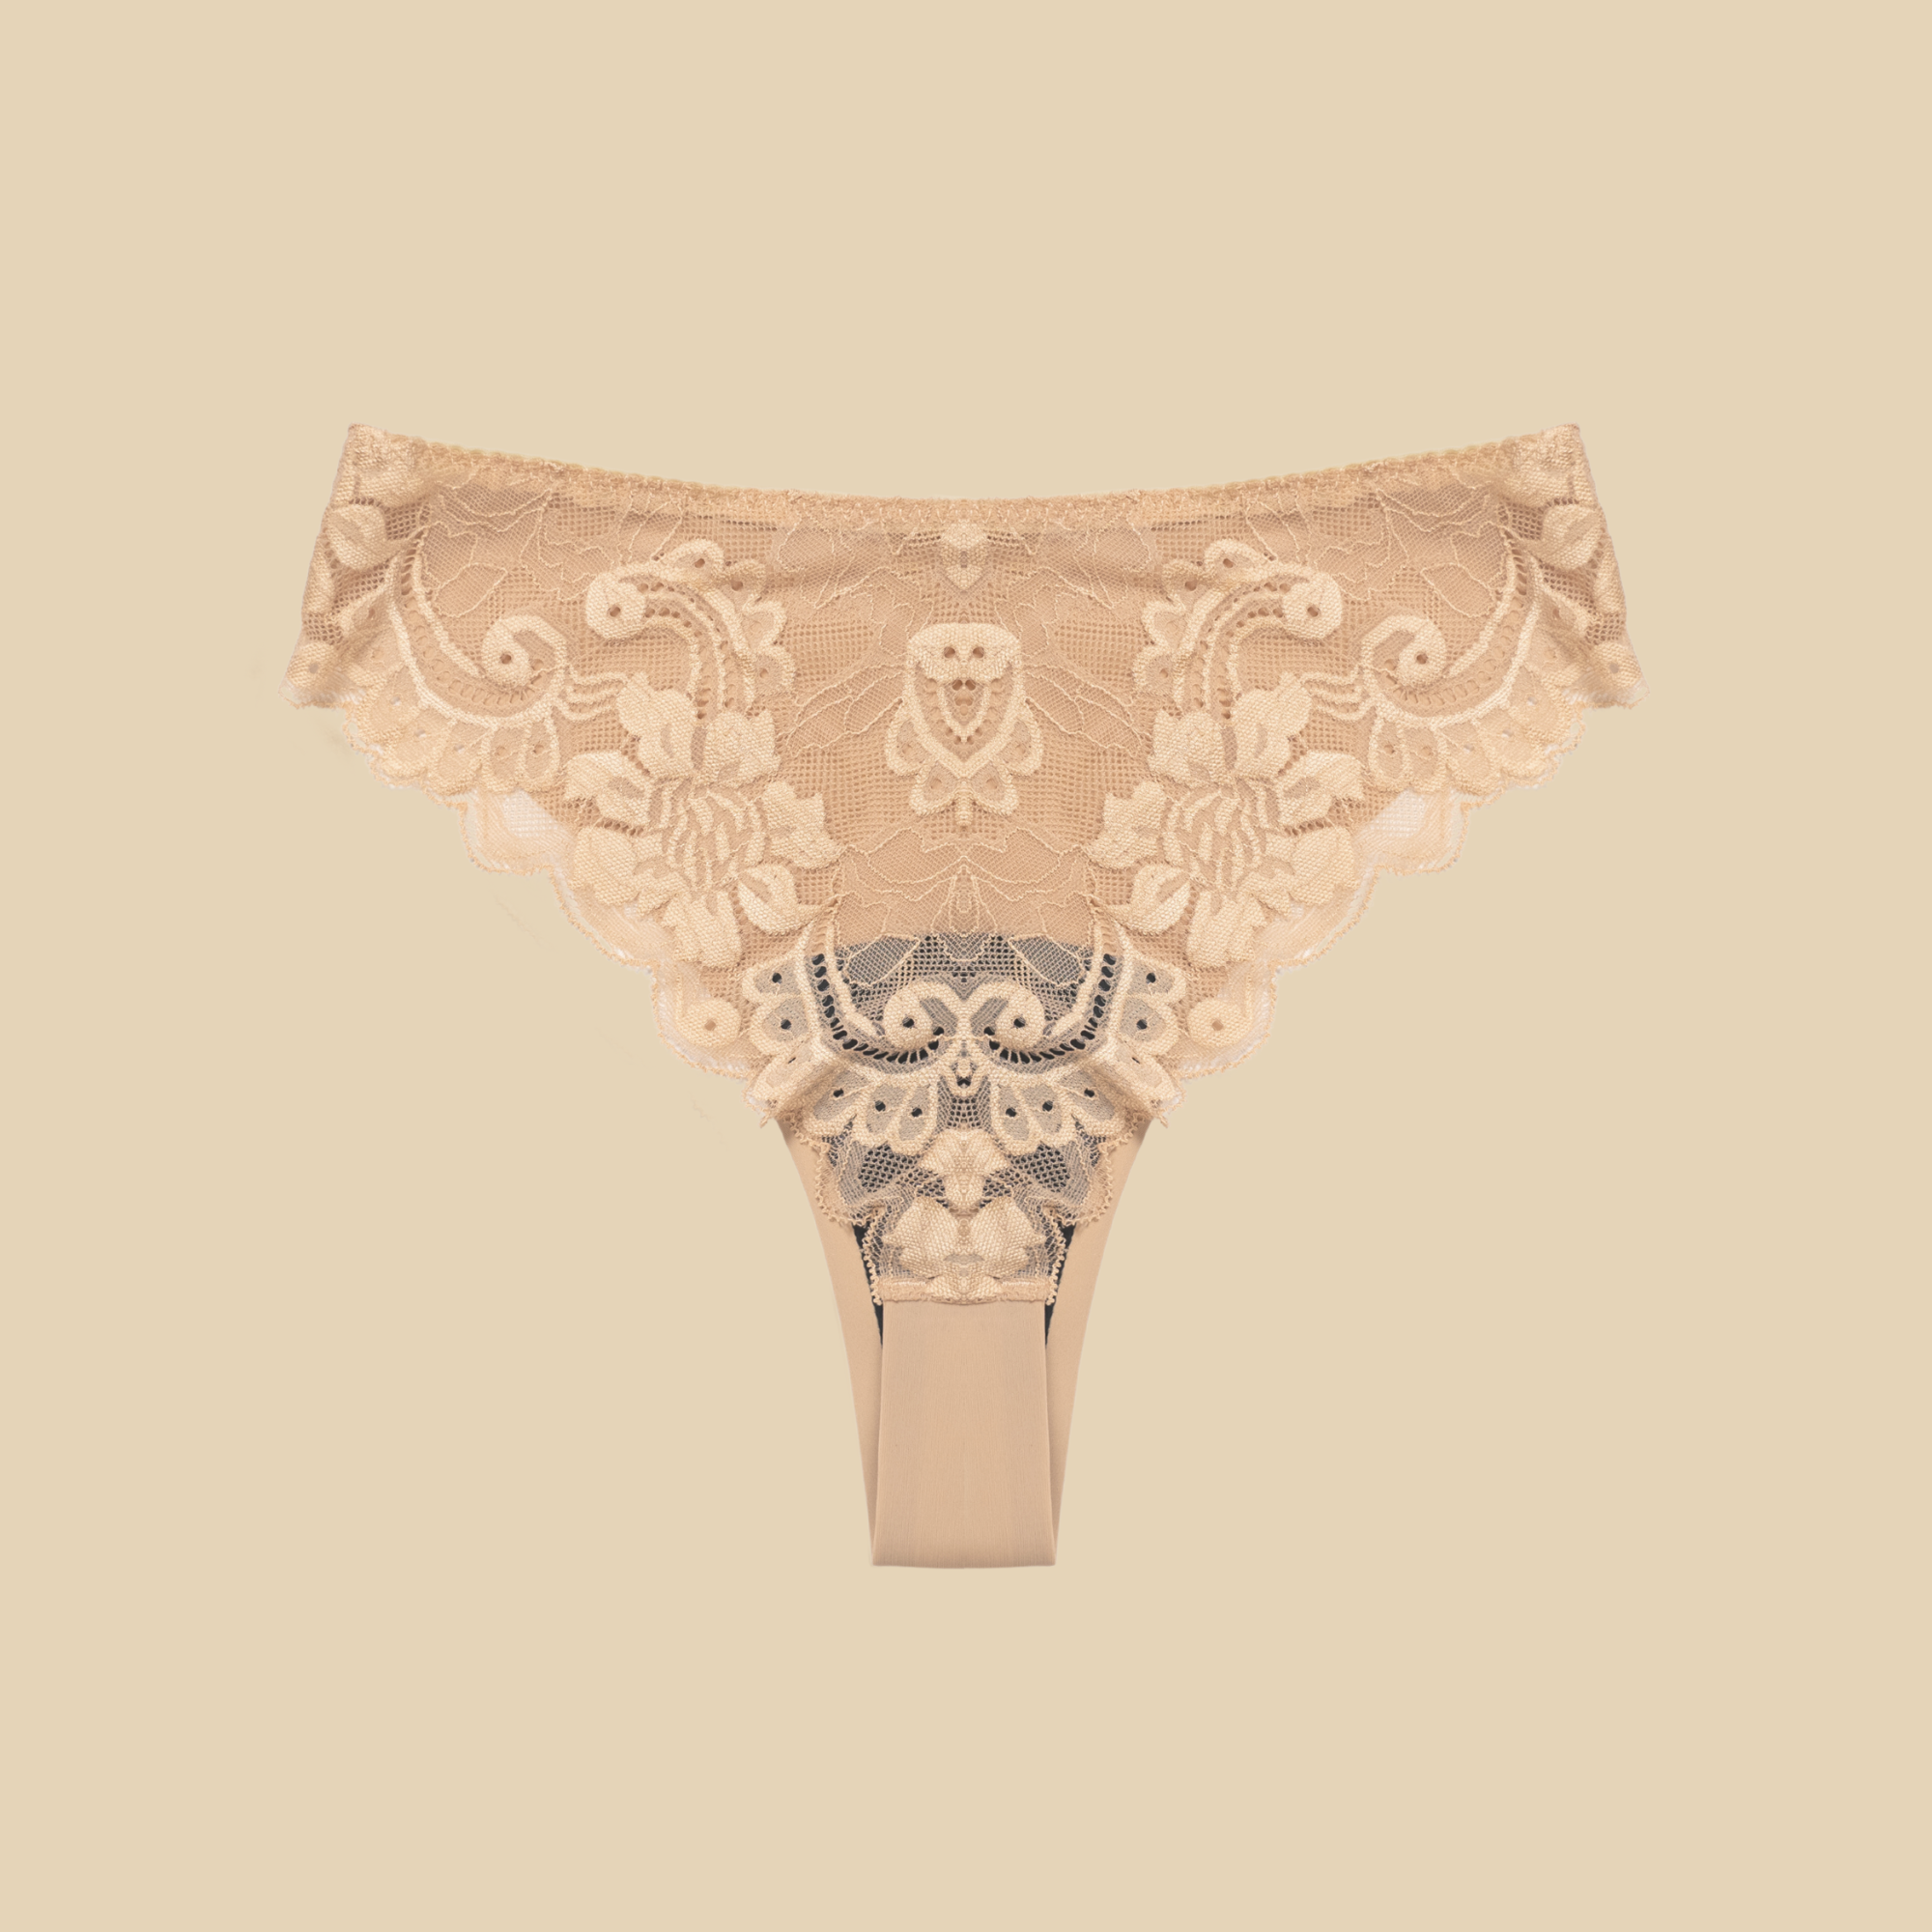 dais daily underwear which is a sustainable alternative to panty liners and tampons. Used for light periods and discharge. In Brazilian cut with lace and beige colour shown from the back. 